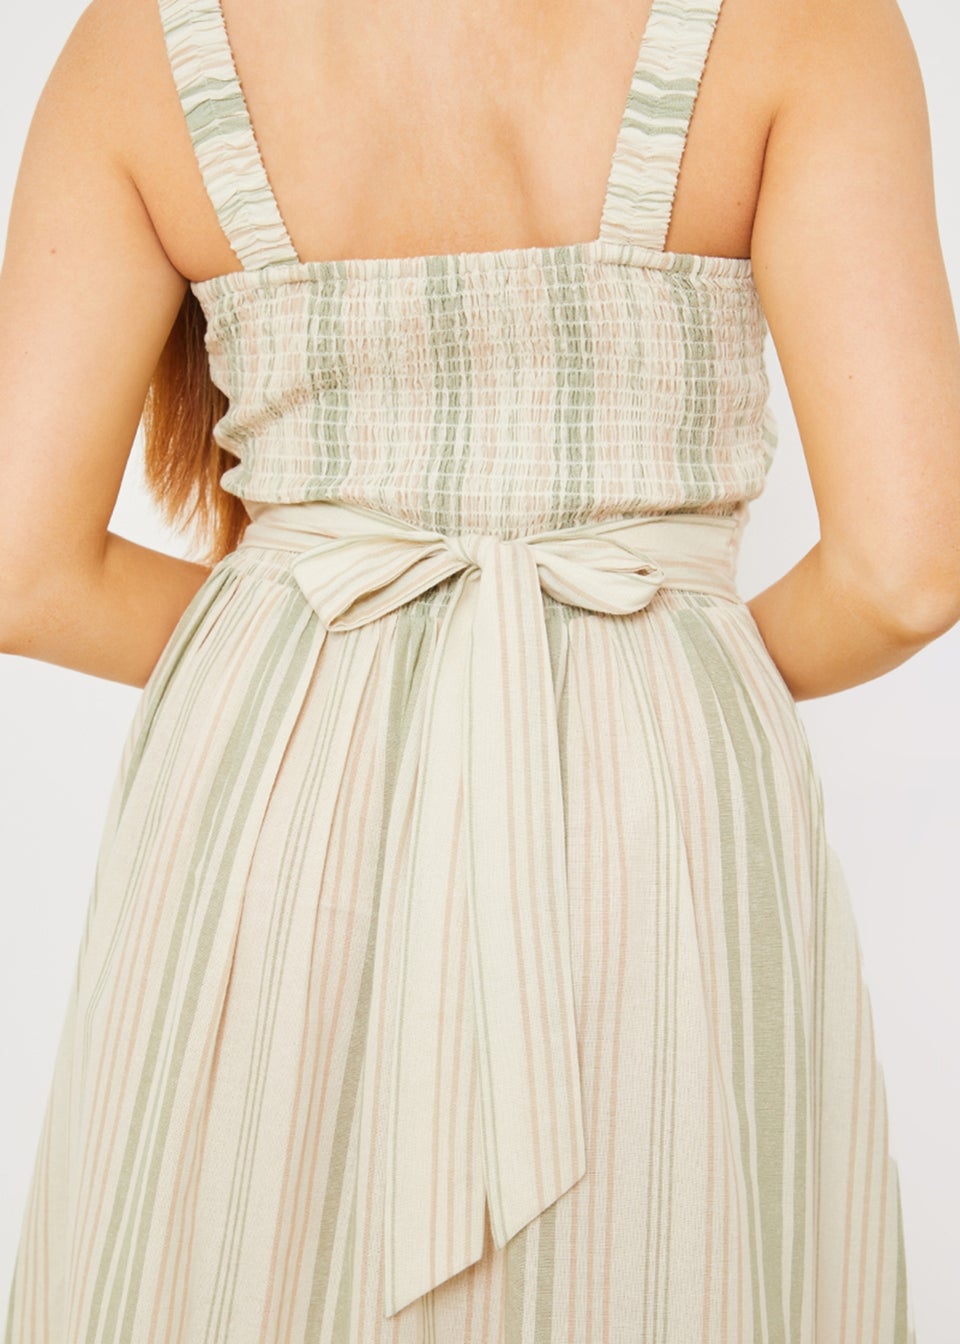 In The Style Stacey Green Tie Back Midi Dress